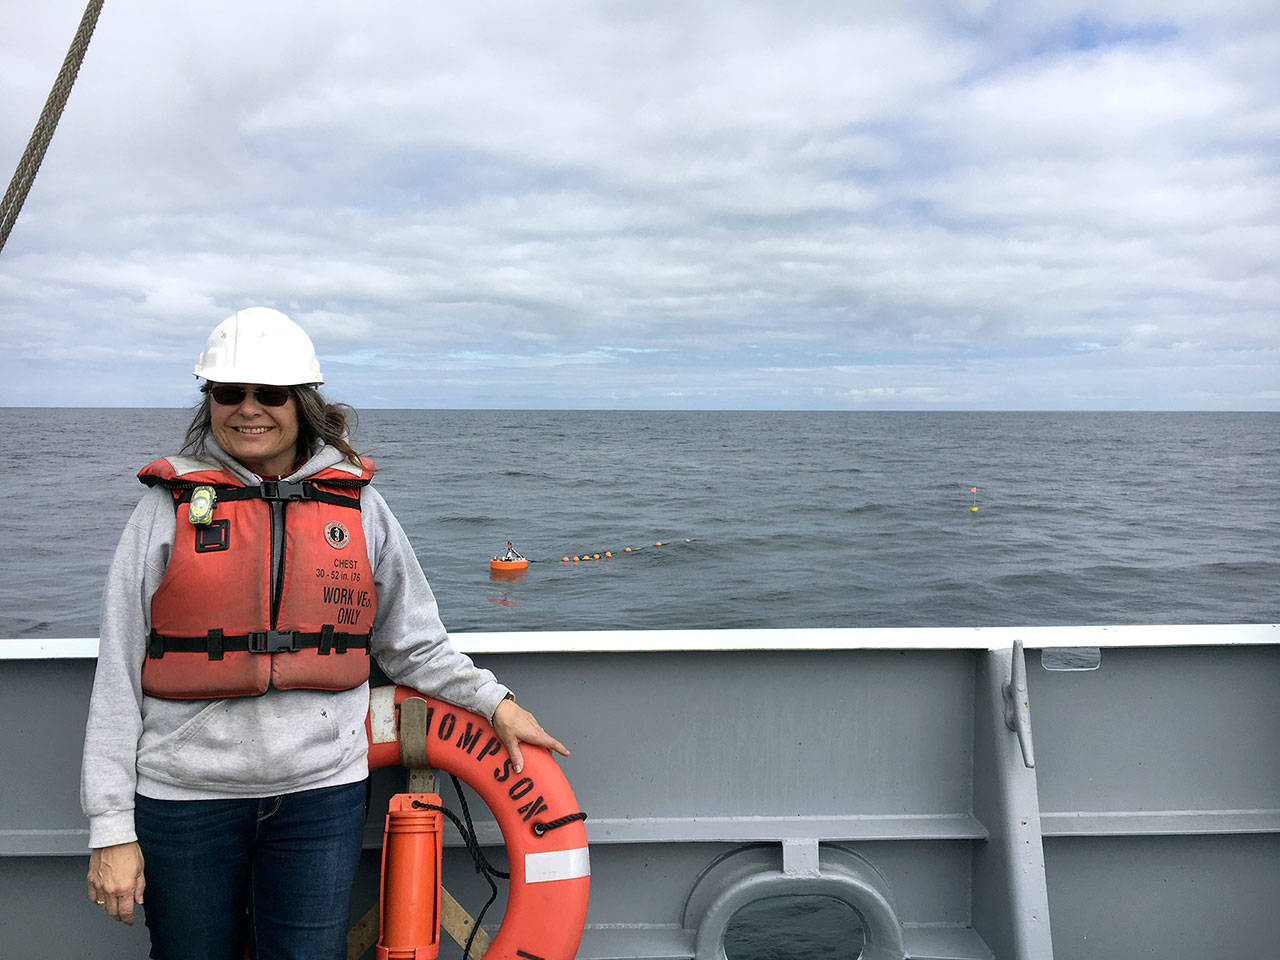 Jan Newton, a professor at the University of Washington, will be the featured speaker Jan. 13 at the Port Townsend Marine Science Center’s The Future of Oceans lecture.